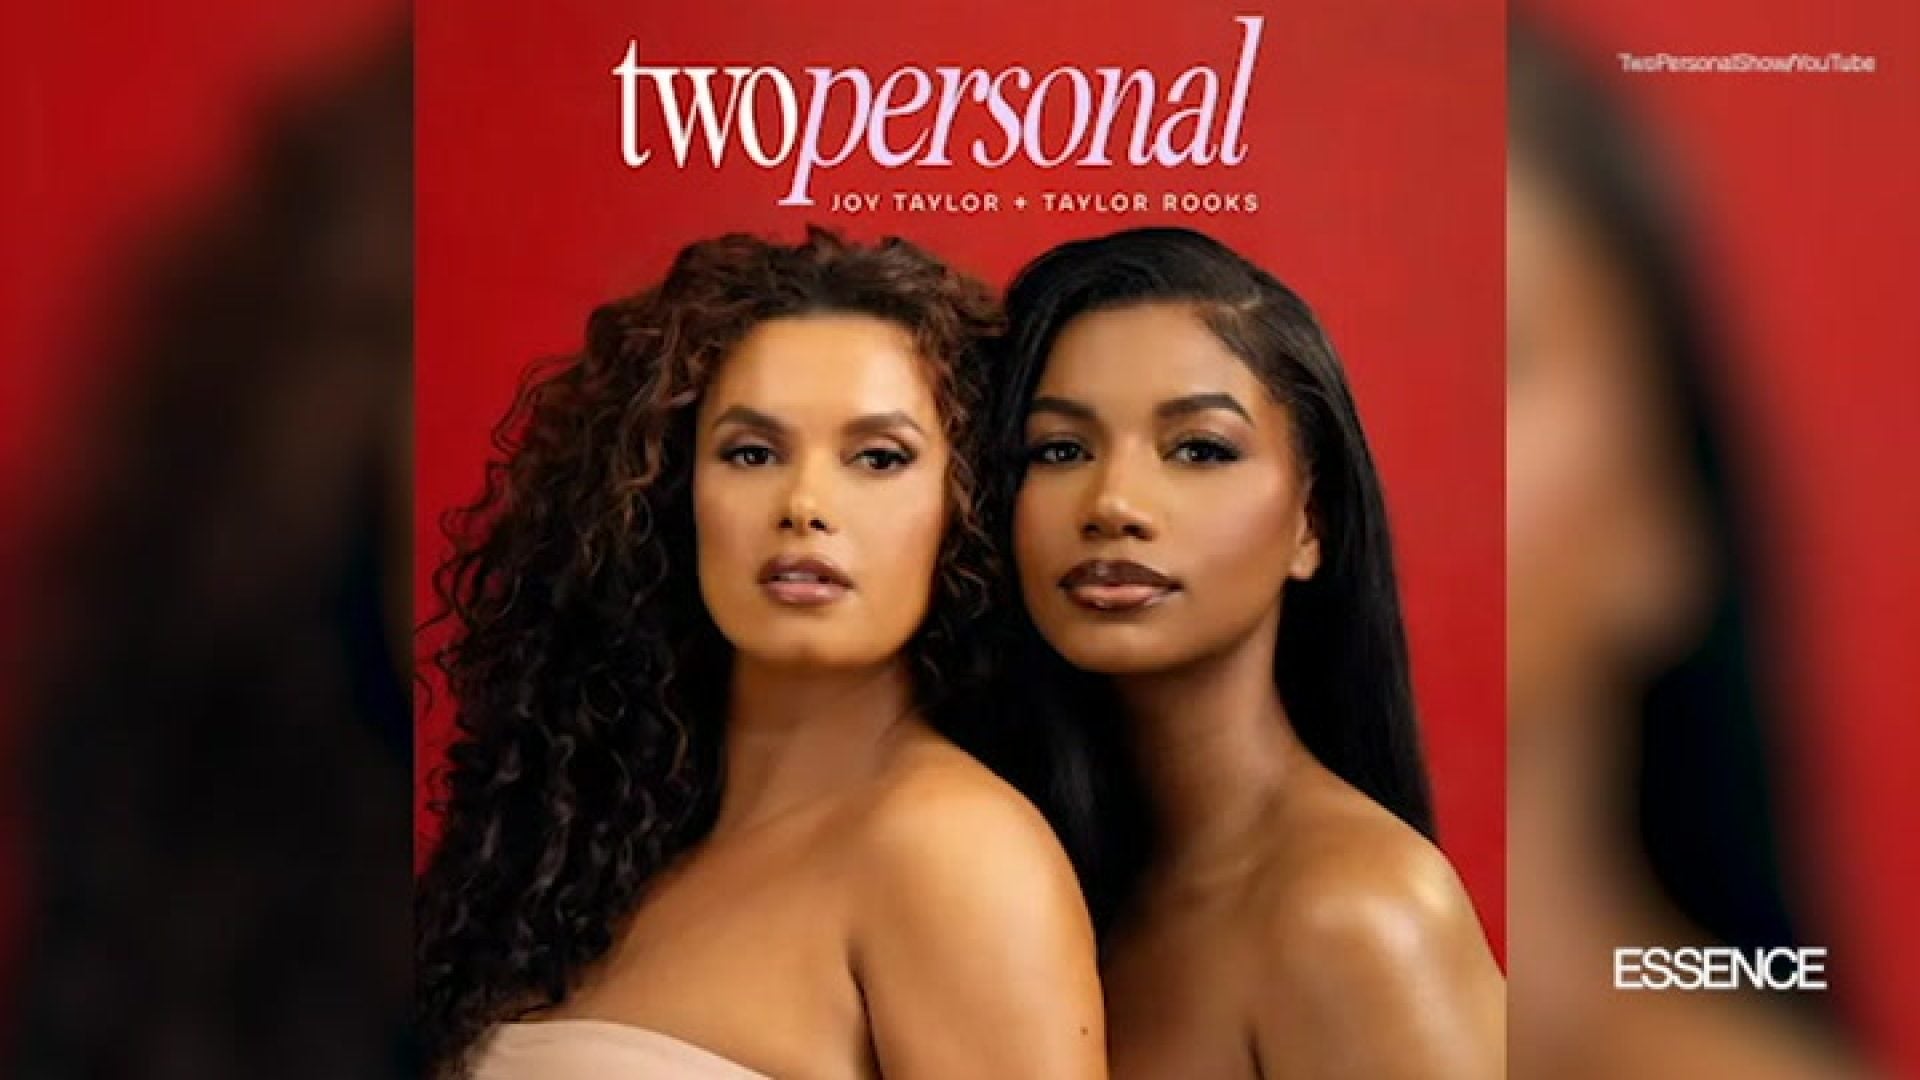 WATCH: Joy Taylor And Taylor Rooks Break Free Of Restrictions With ‘Two Personal’